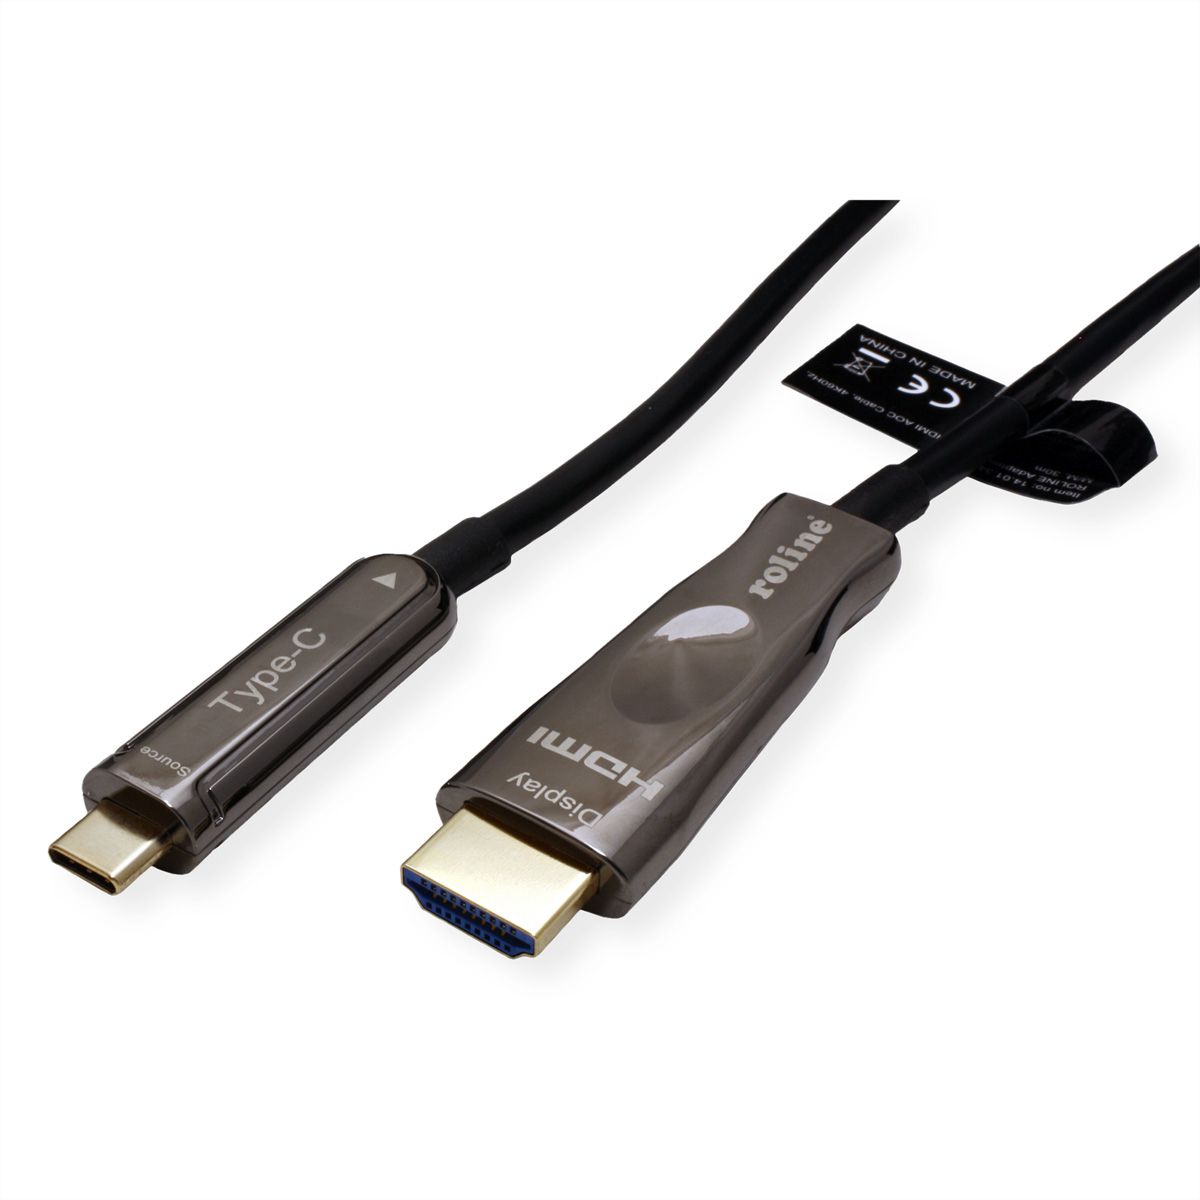 cable matters usb to hdmi driver download